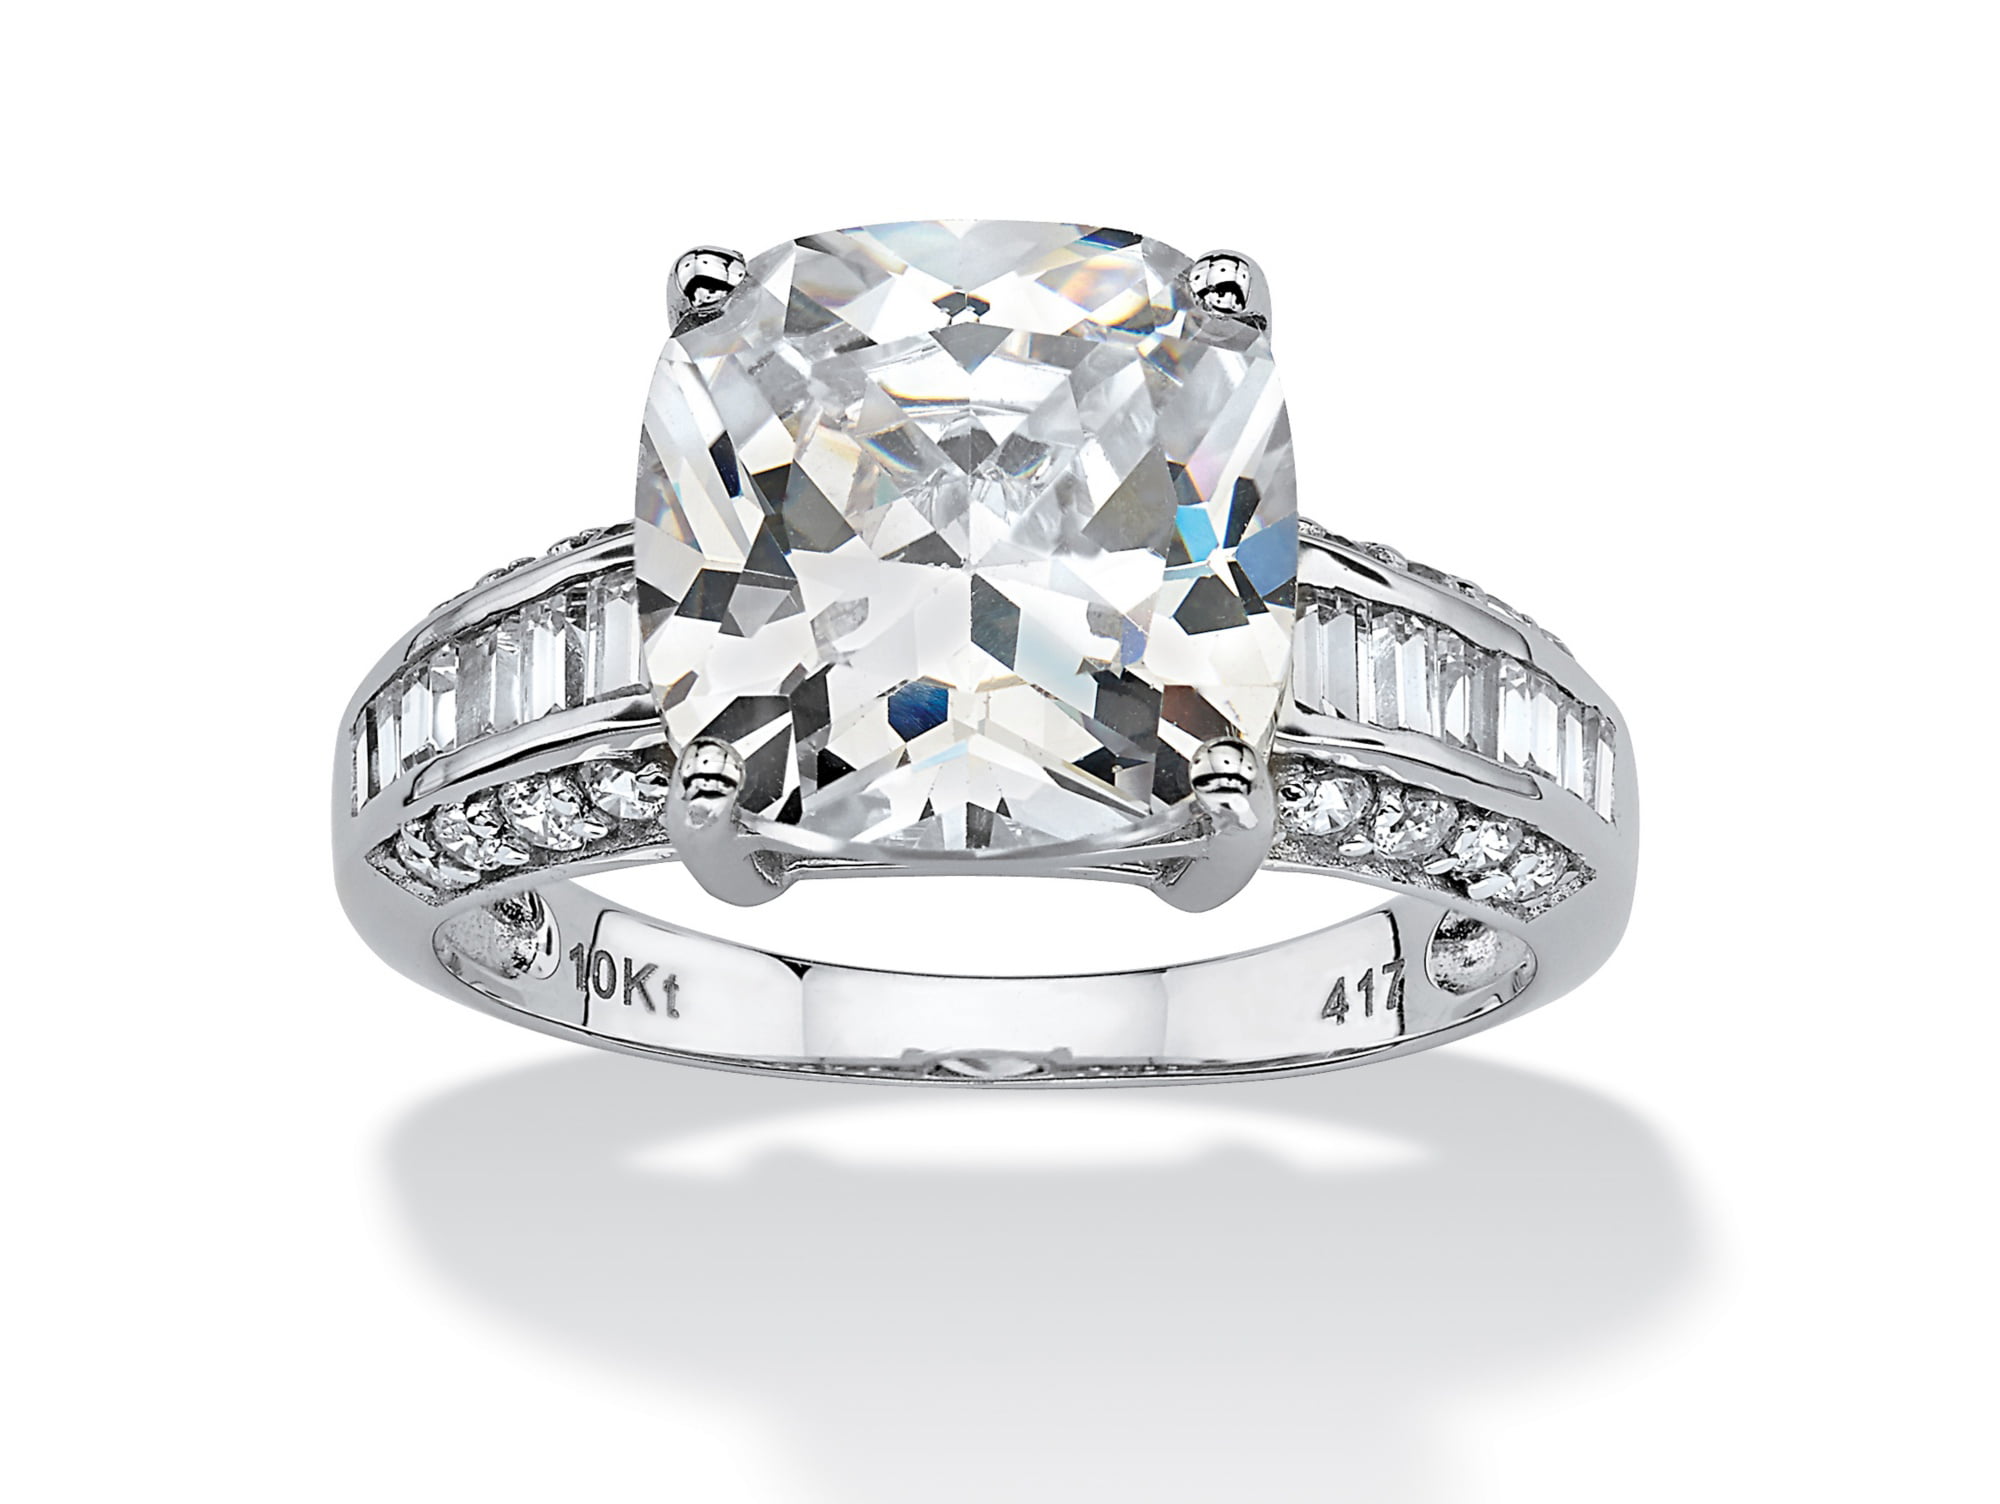 3.37 TCW Cubic Zirconia Engagement Ring in 10k White Gold 